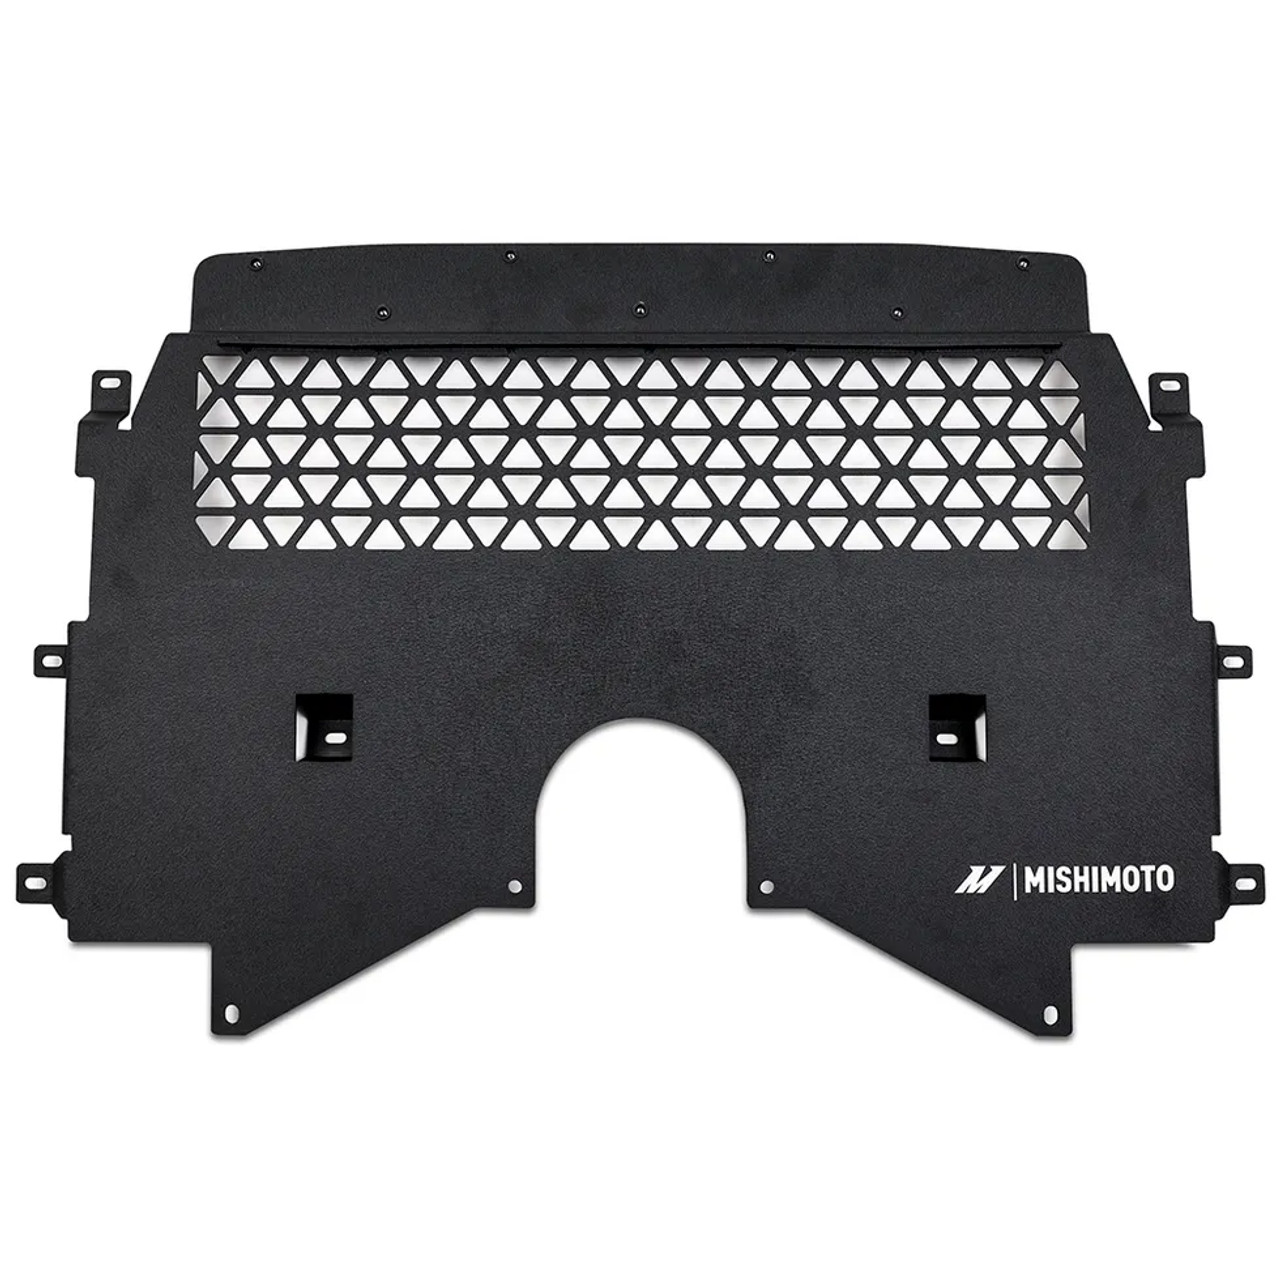 Mishimoto Skid Plate for G80 M3, G82/G83 M4 & G87 M2